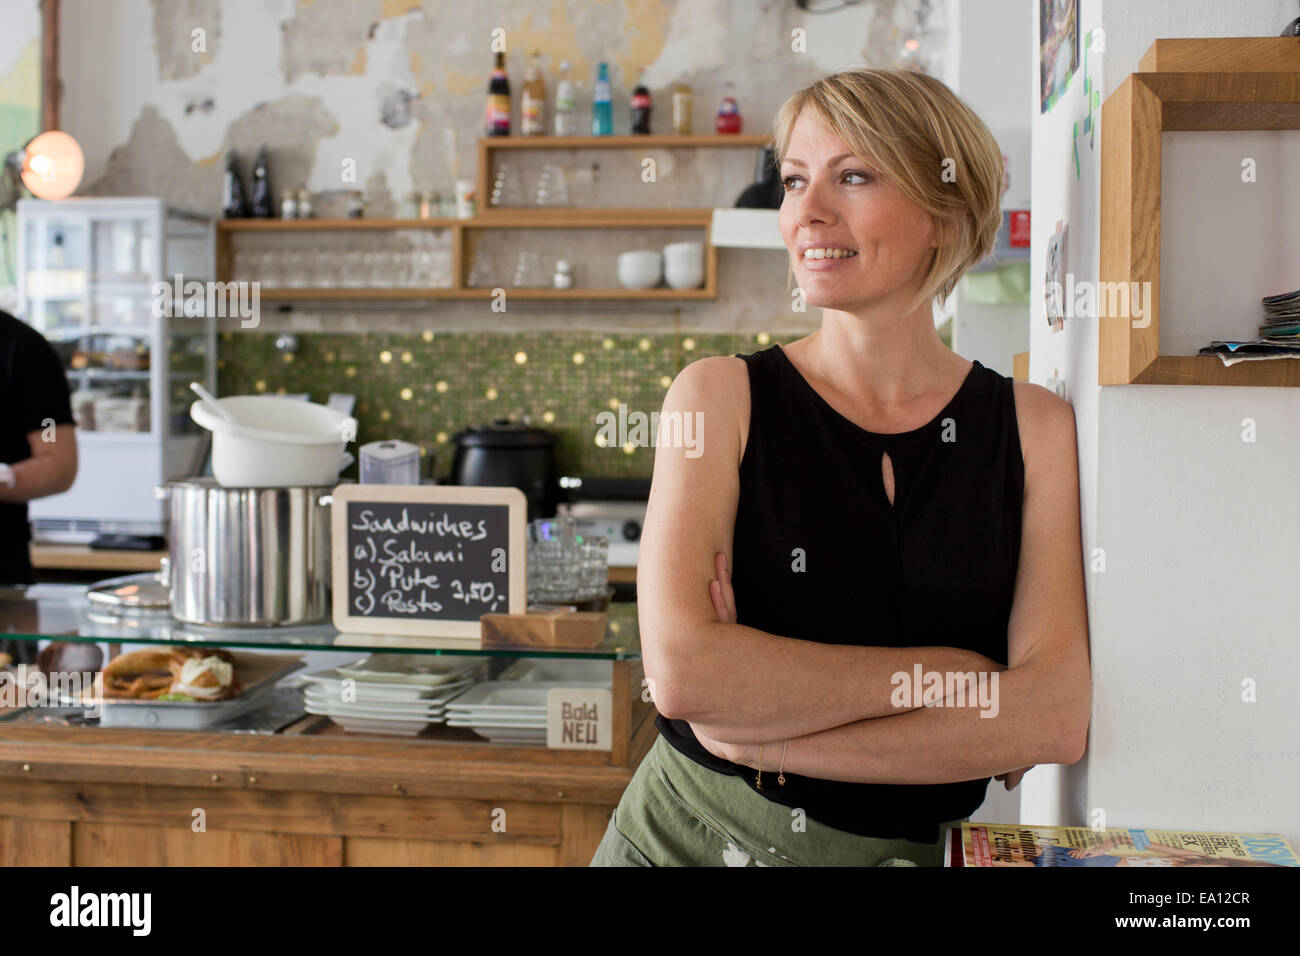 Mid adult woman in cafe Stock Photo